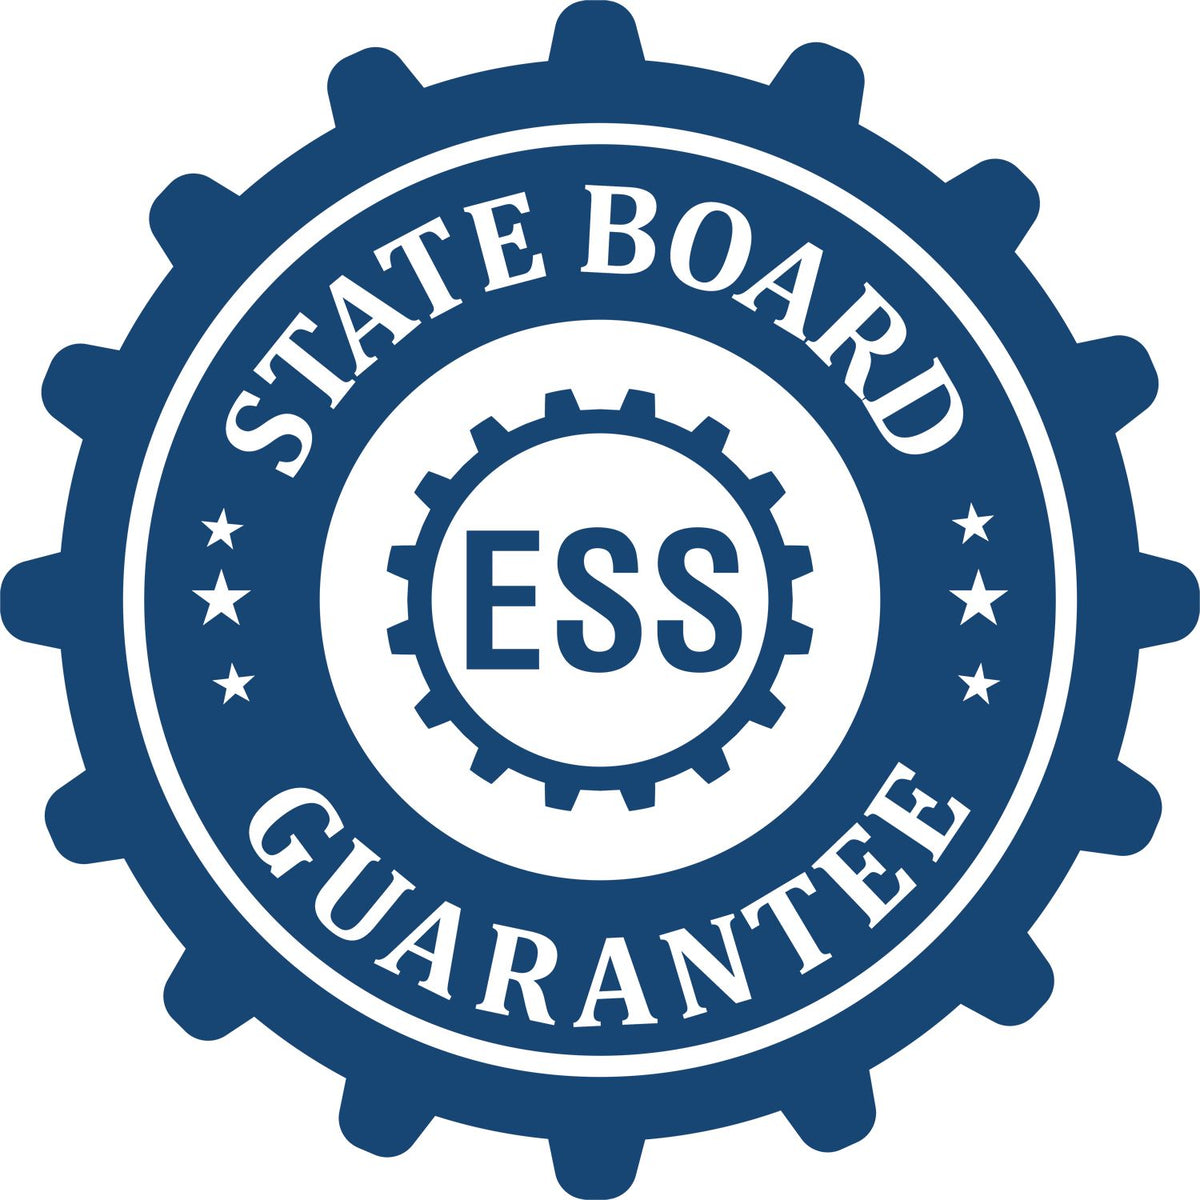 An emblem in a gear shape illustrating a state board guarantee for the Hybrid Florida Landscape Architect Seal